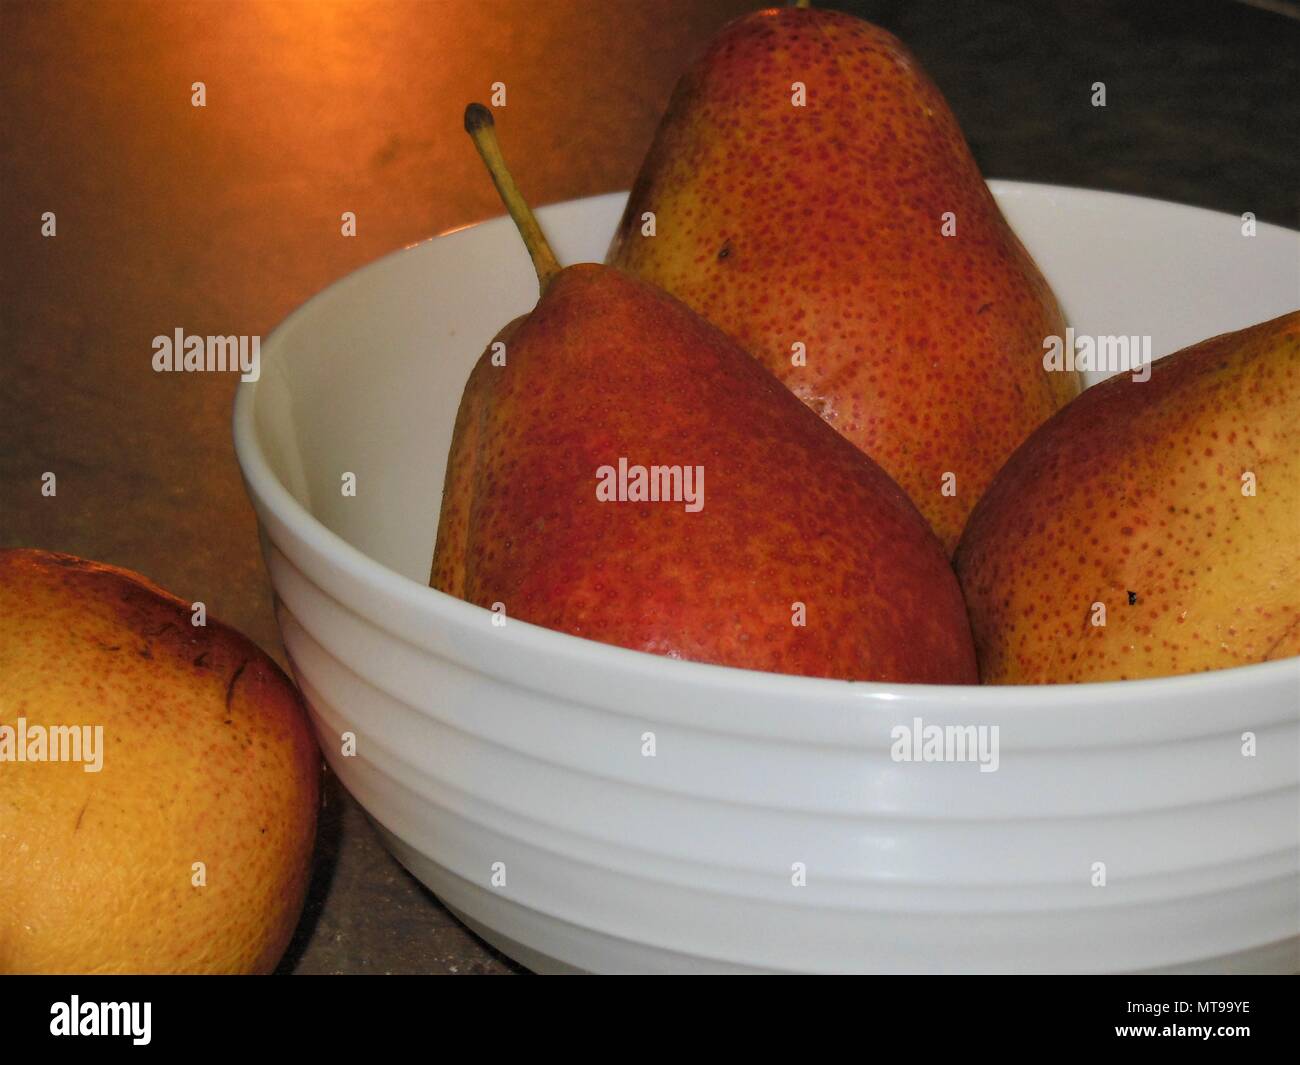 Pears in a white bowl Stock Photo